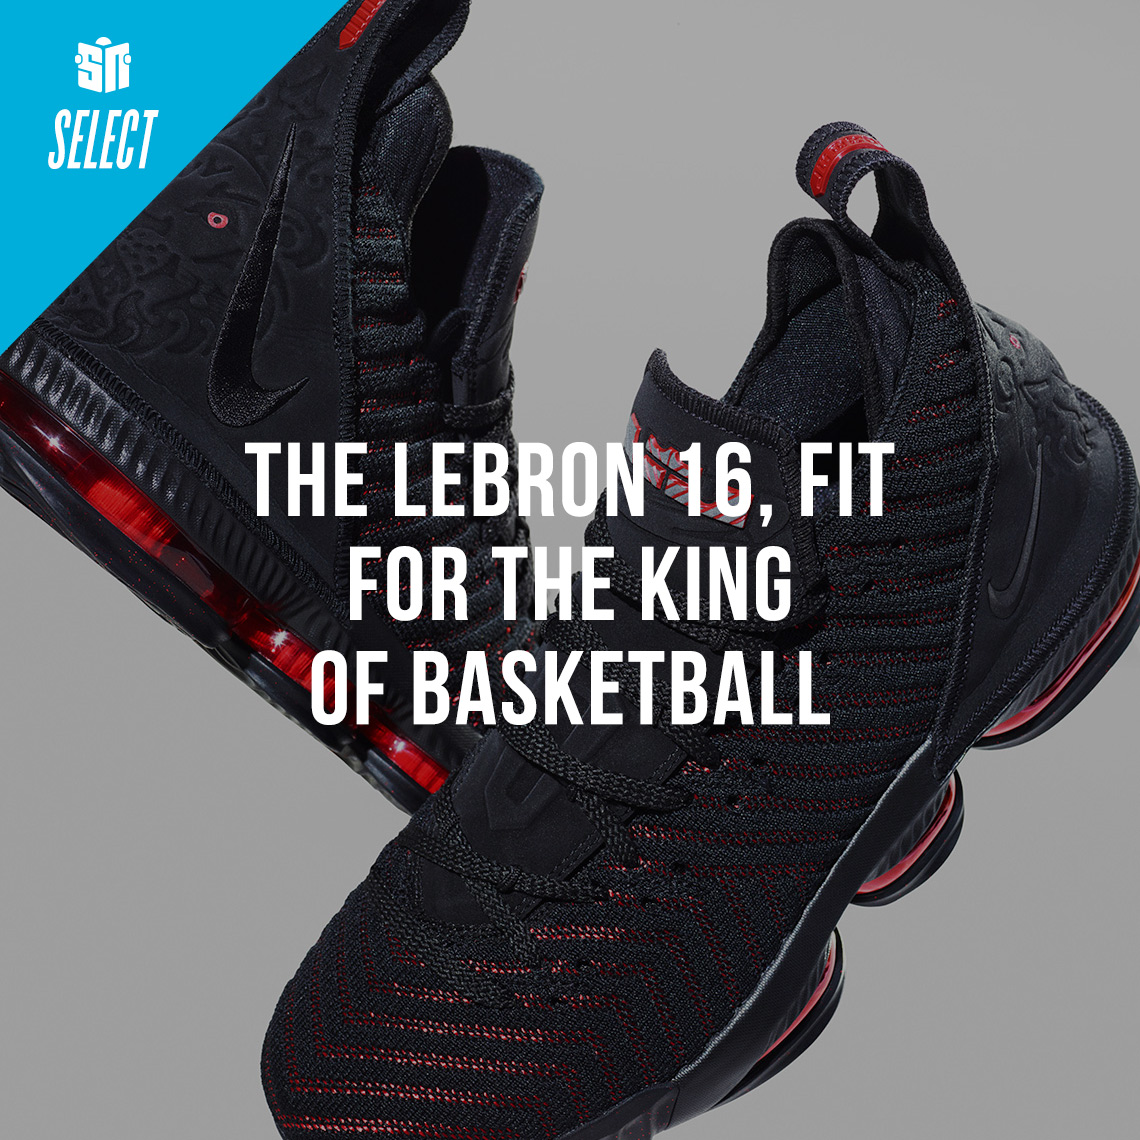 The Nike LeBron 16, Fit For The King Of Basketball